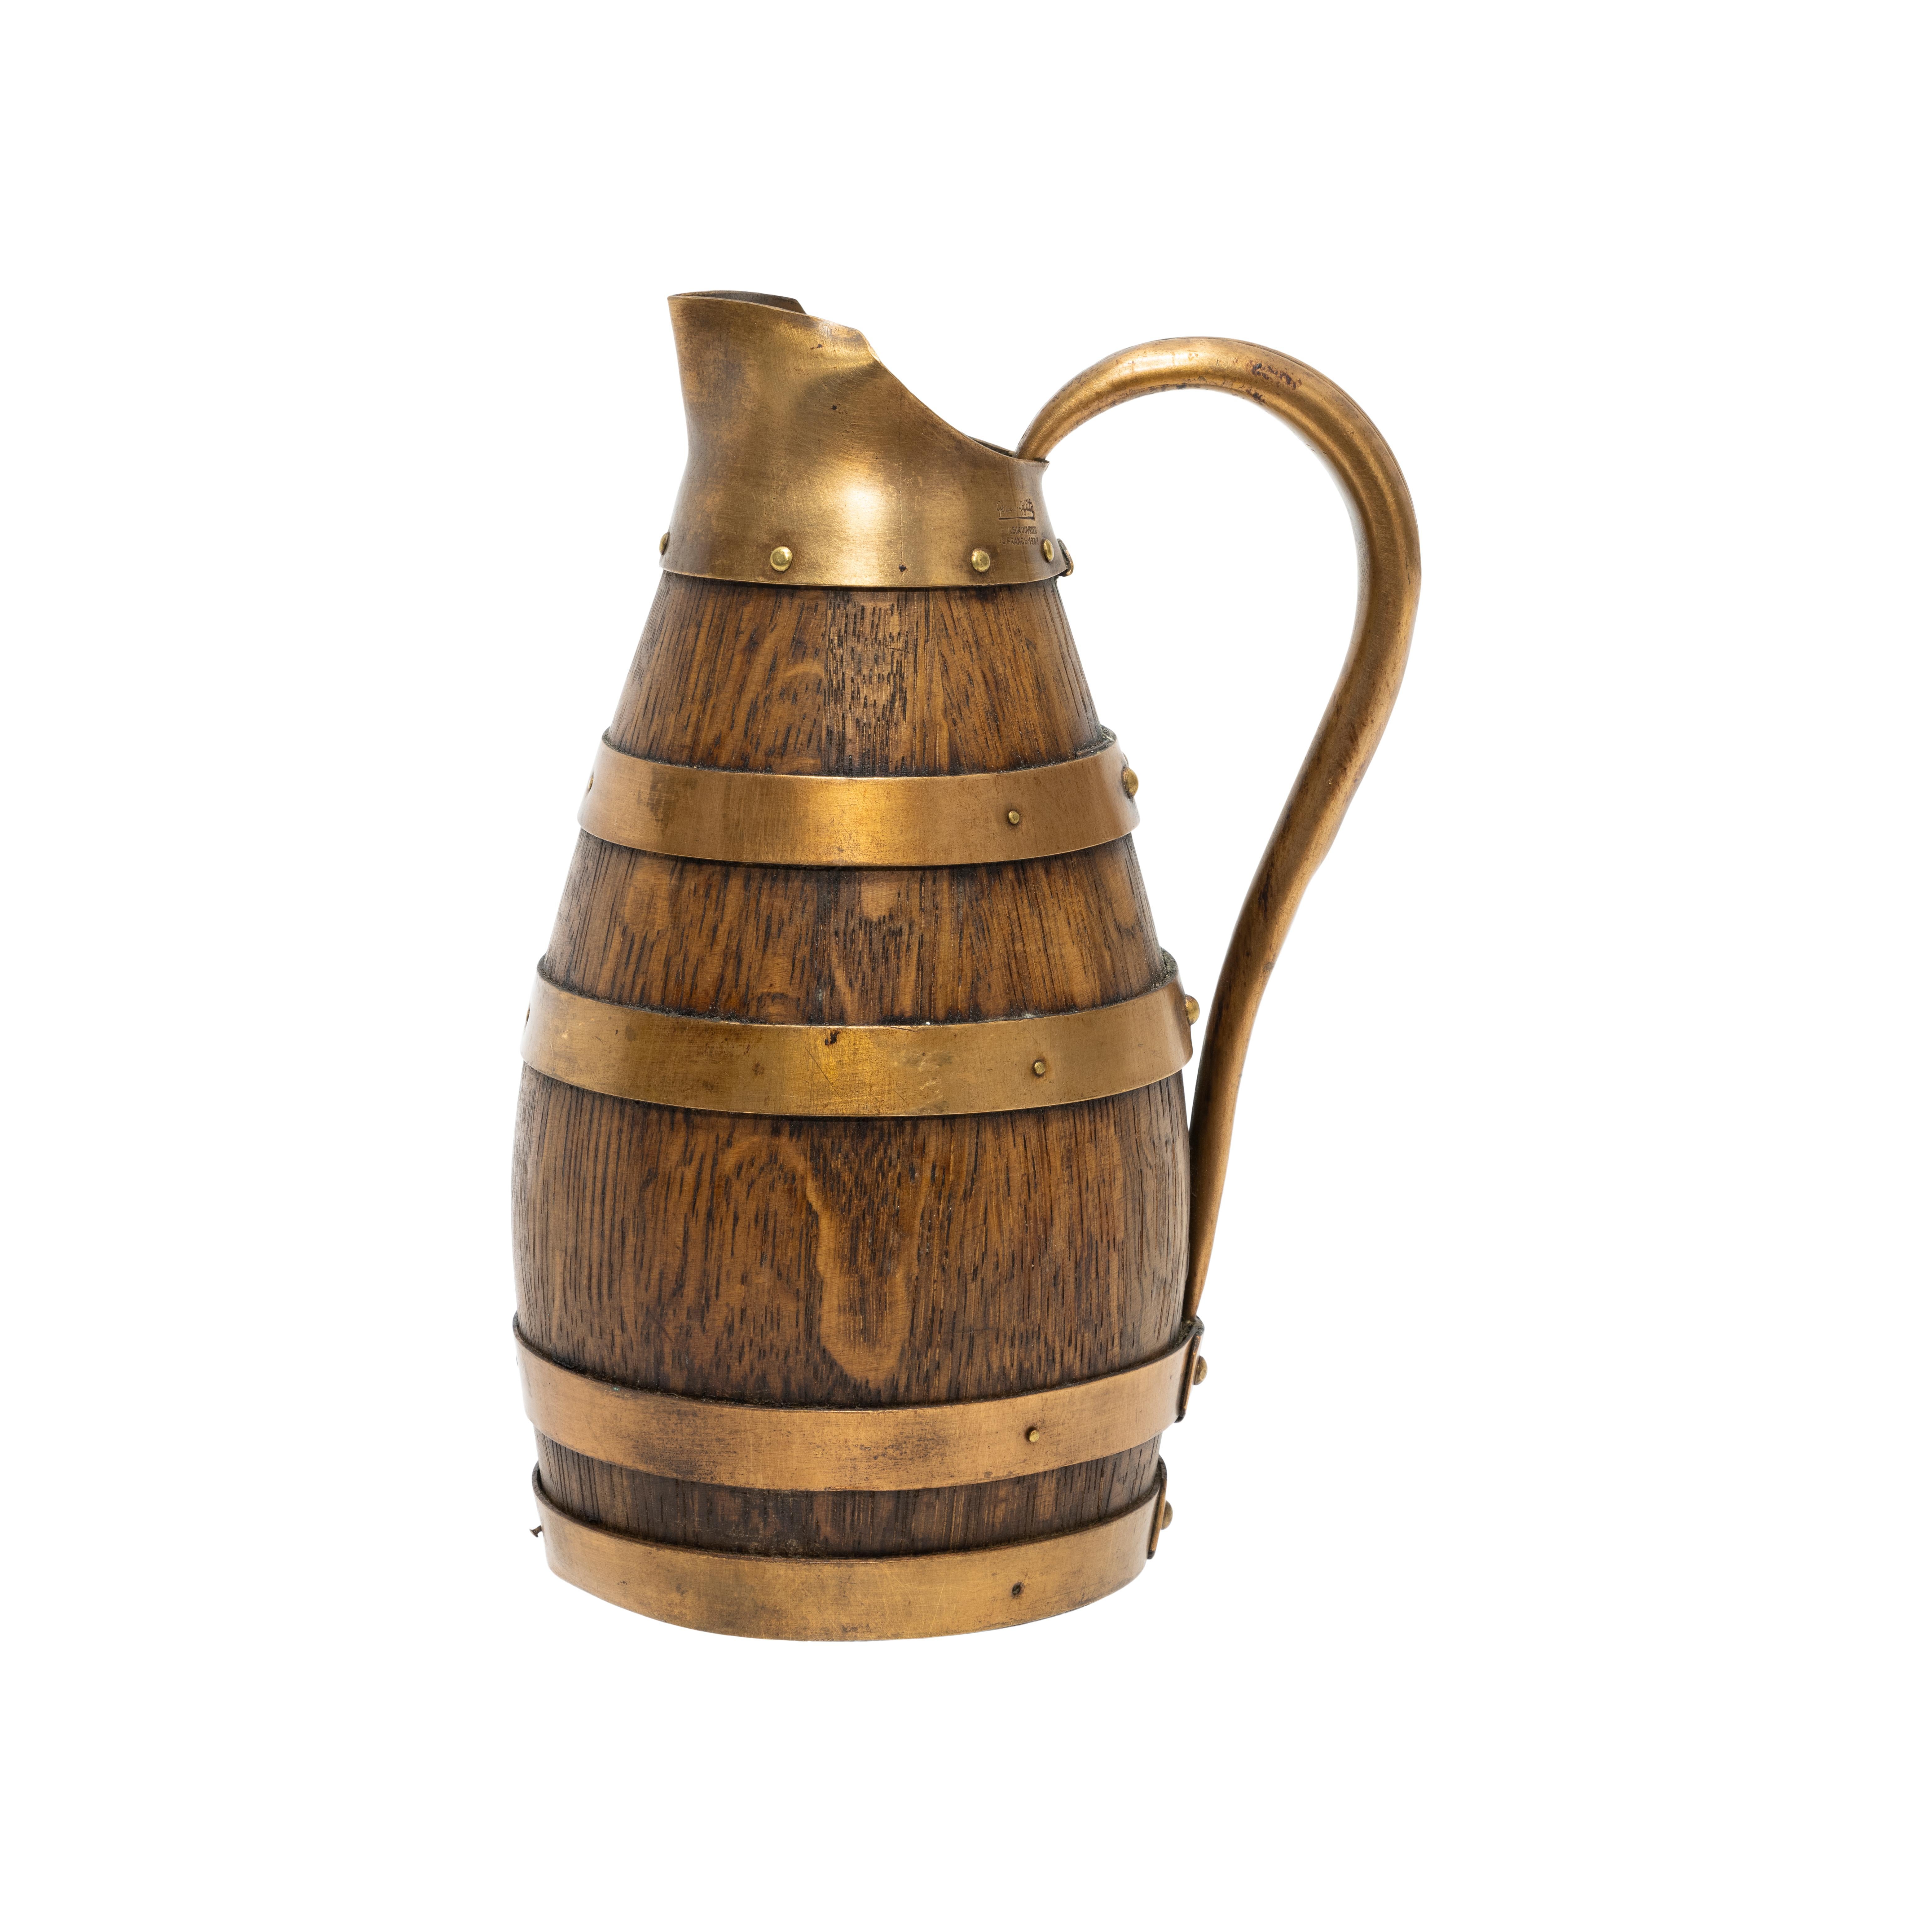 Miniature French Alascian Wine Pitcher In Good Condition For Sale In Coeur d'Alene, ID